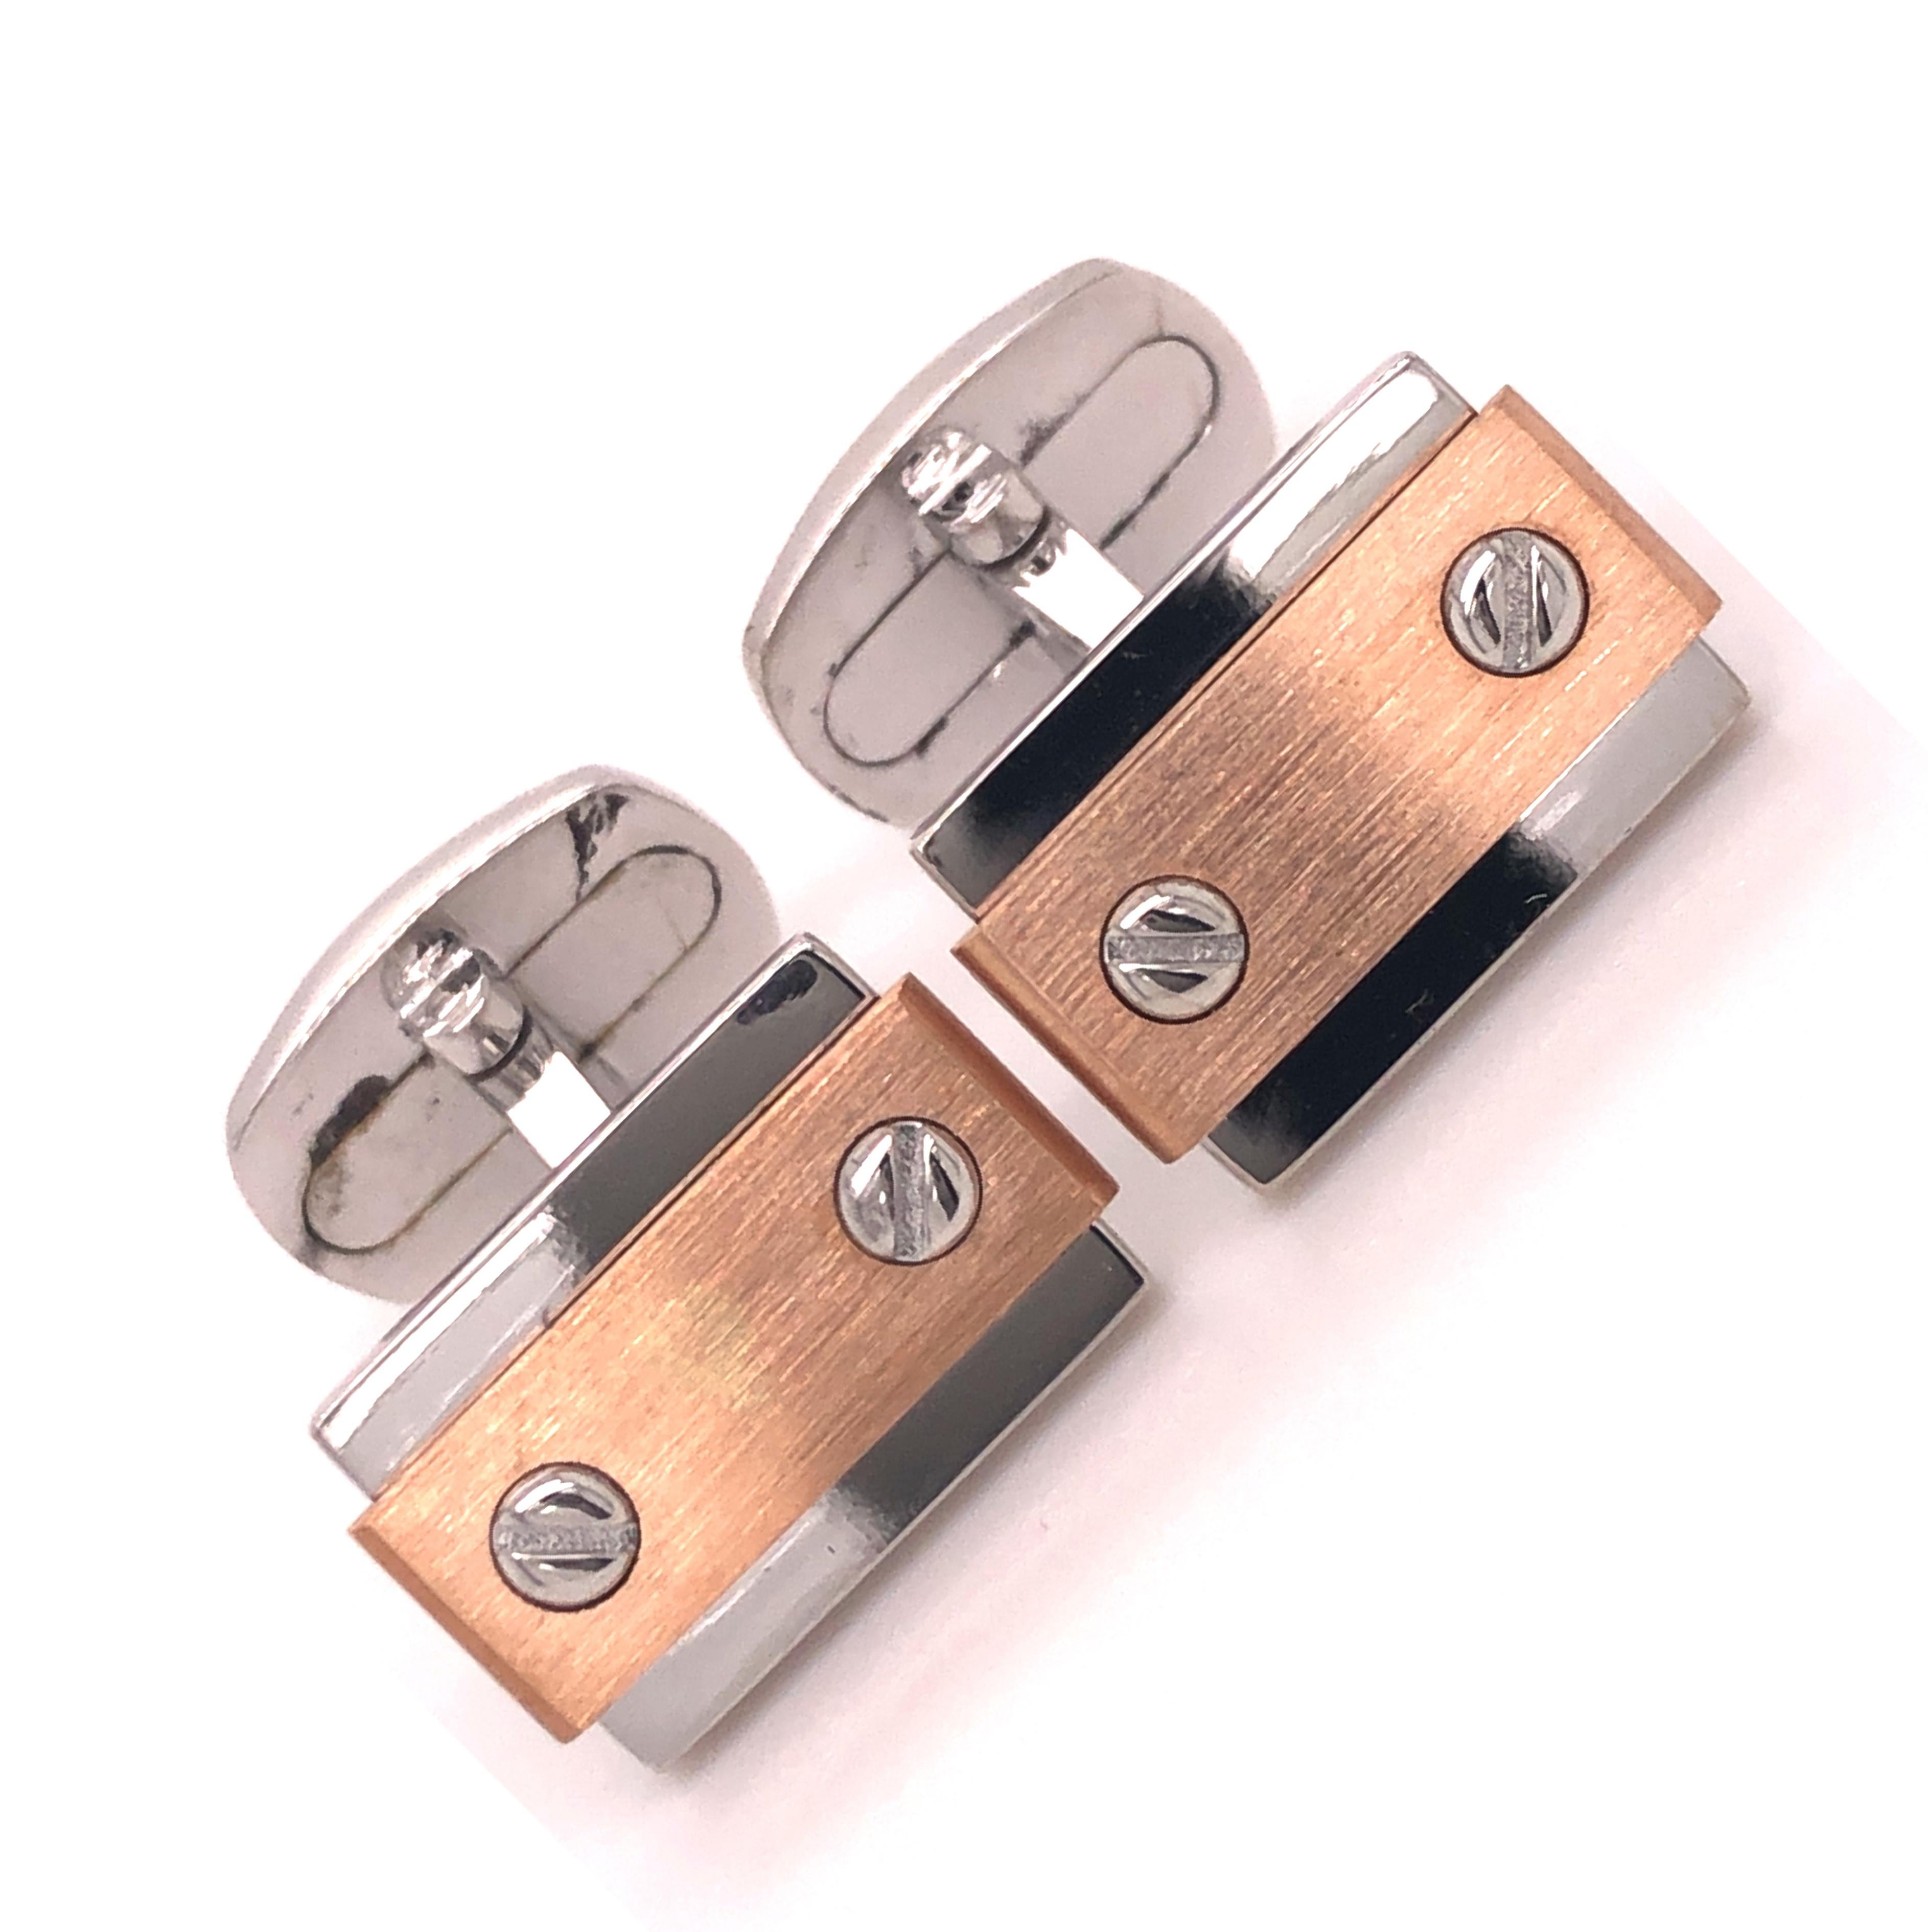 Chic and Timeless,  Brushed Rose Gold in a Rectagular Shaped, Mirror Finish Stetting, 18Kt Rose Gold Sterling Silver Cufflinks, T-bar back.
In our smart fitted Black Box and Pouch.
We are pleased to offer Custom Engraving to this piece.
